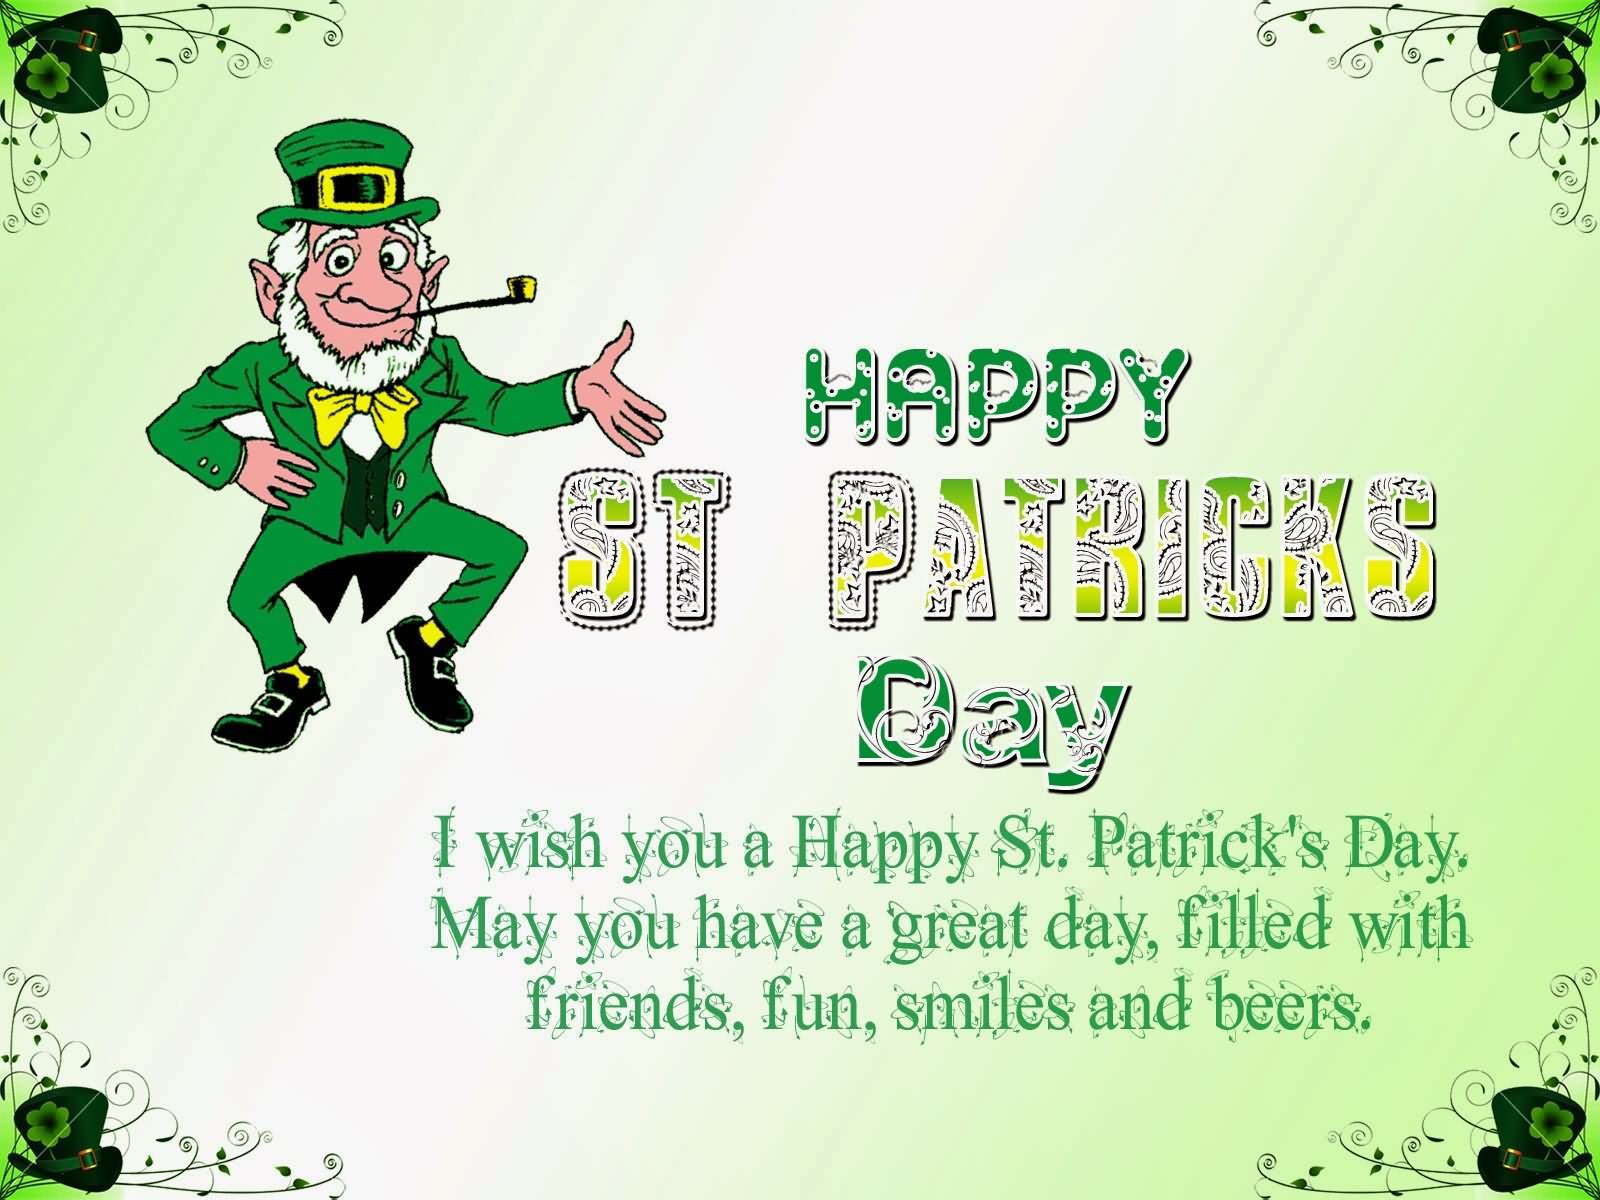 I wish you a Happy St. Patrick’s Day. May you have a great day, filled with friends, fun, smiles and beers.